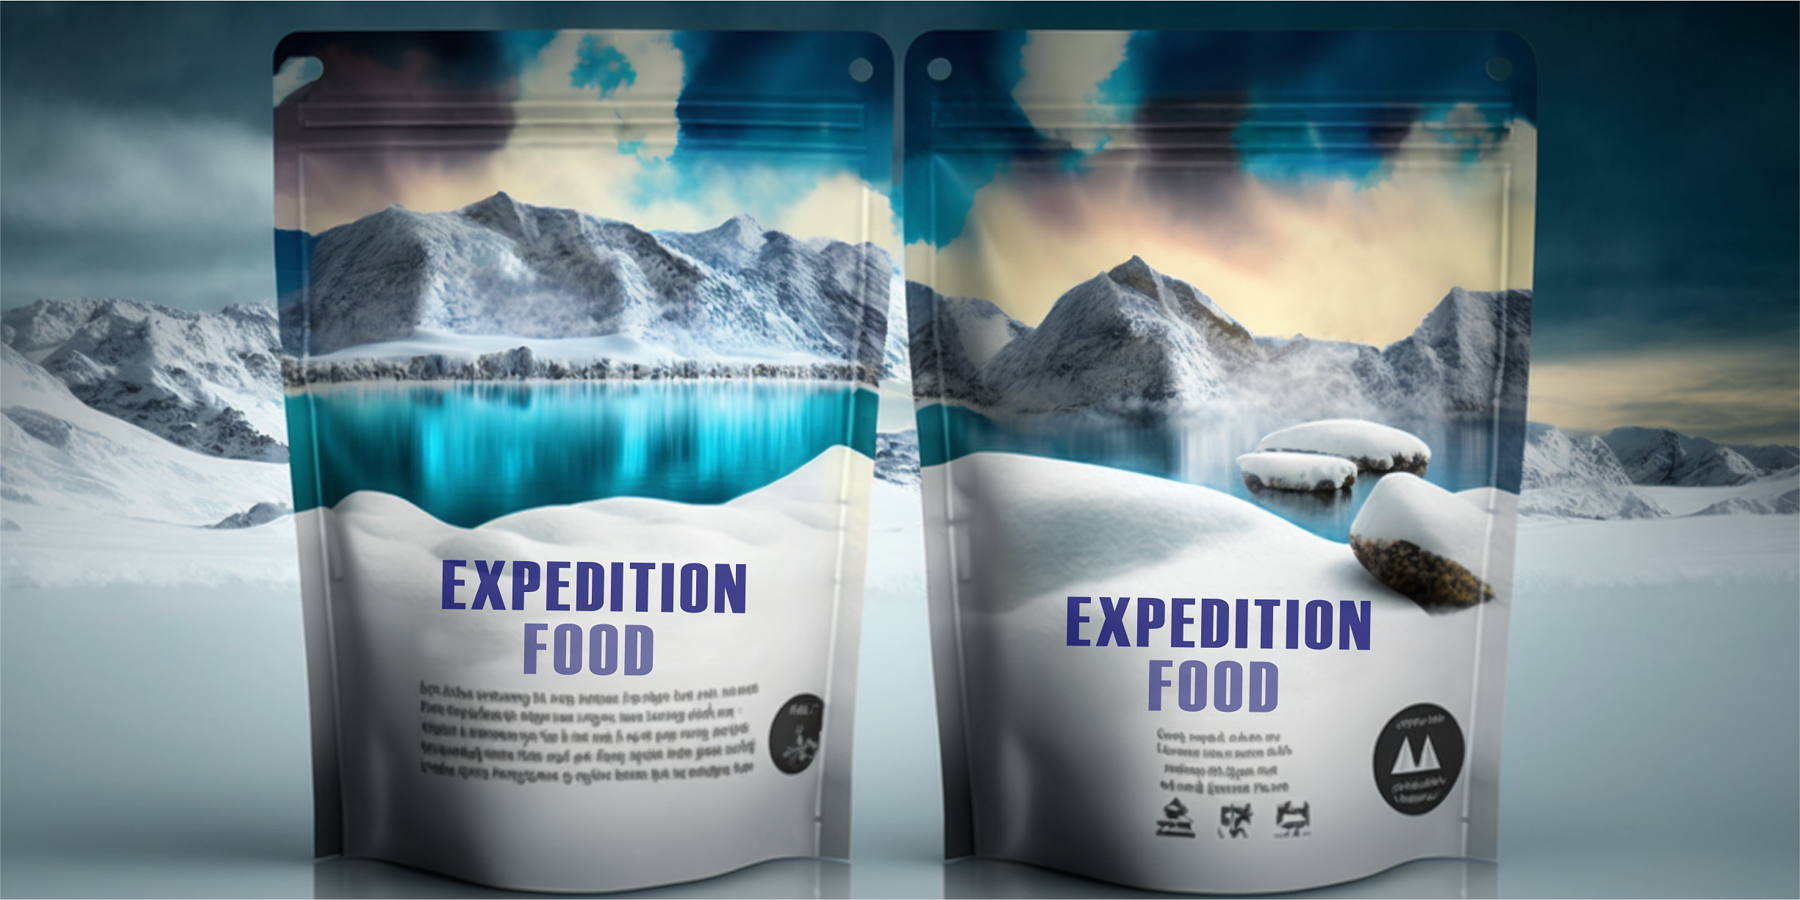 Emergency Food Supply for Extreme Environments: Arctic, Desert, and Mountain Regions